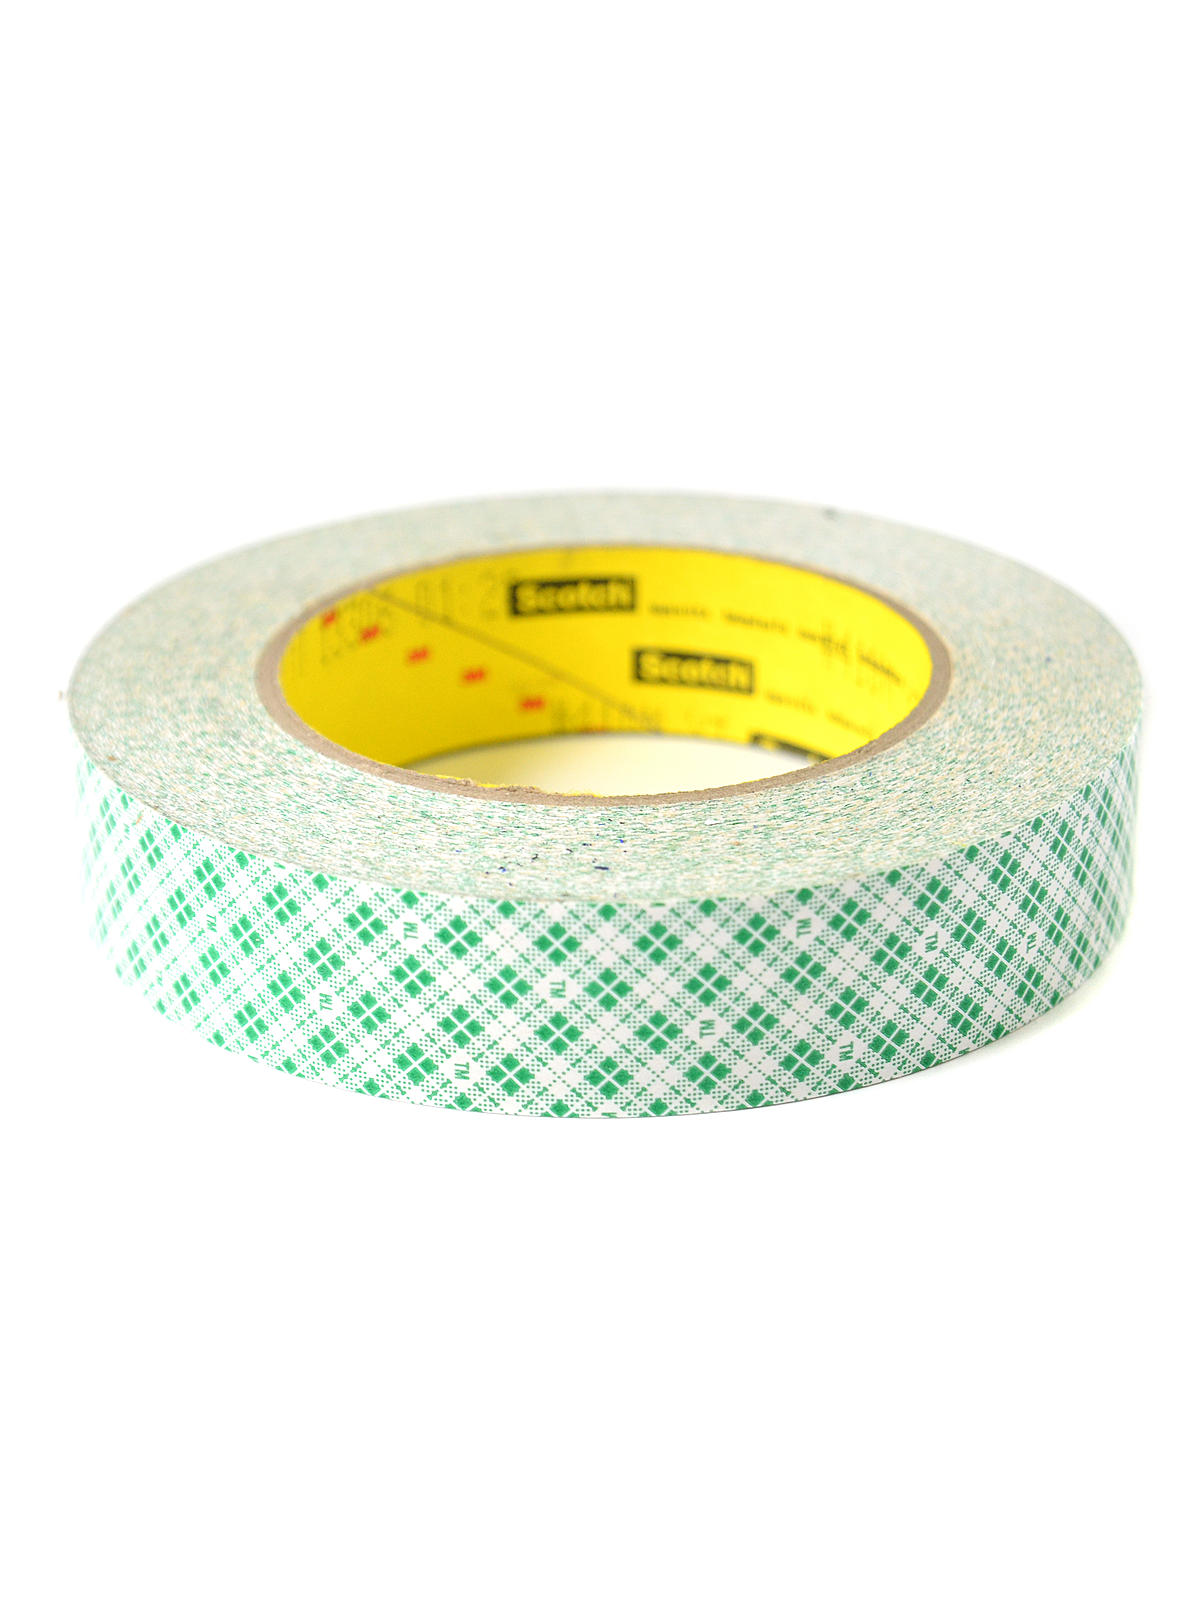 Double Coated Tissue Tape 1 In. X 36 Yd.